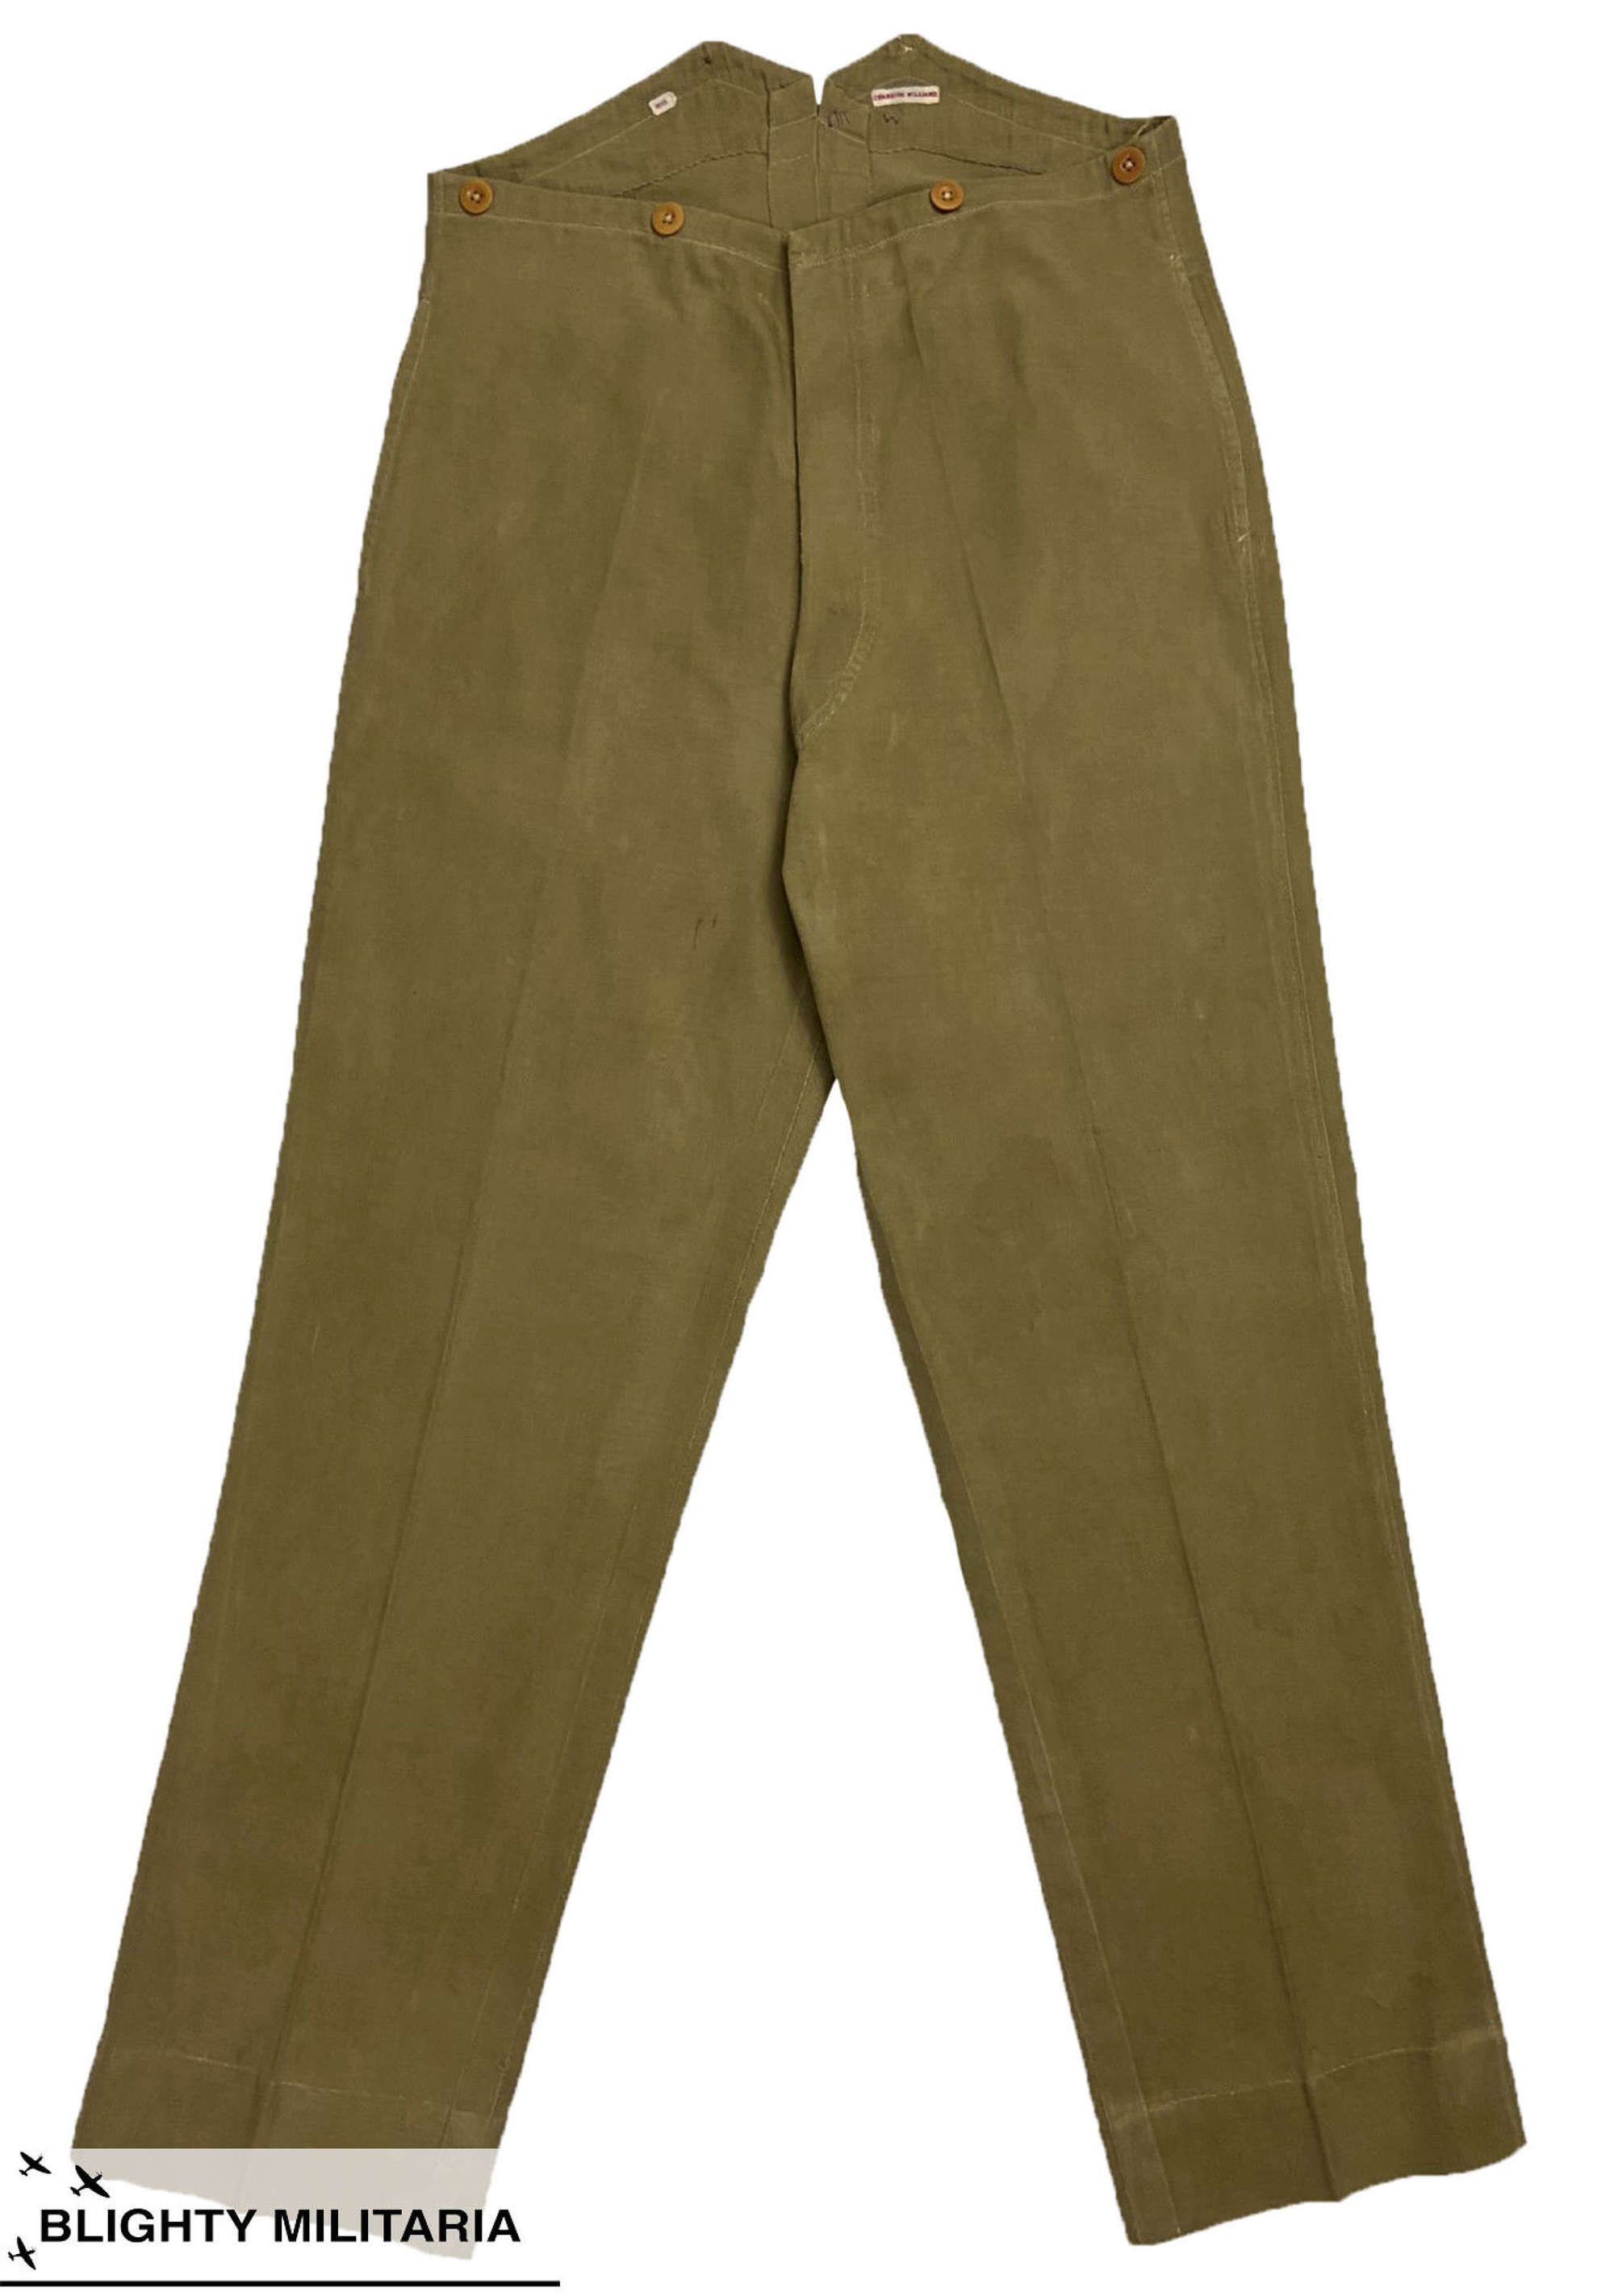 Scarce Early 20th Century British Army Officer's Khaki Drill Trousers